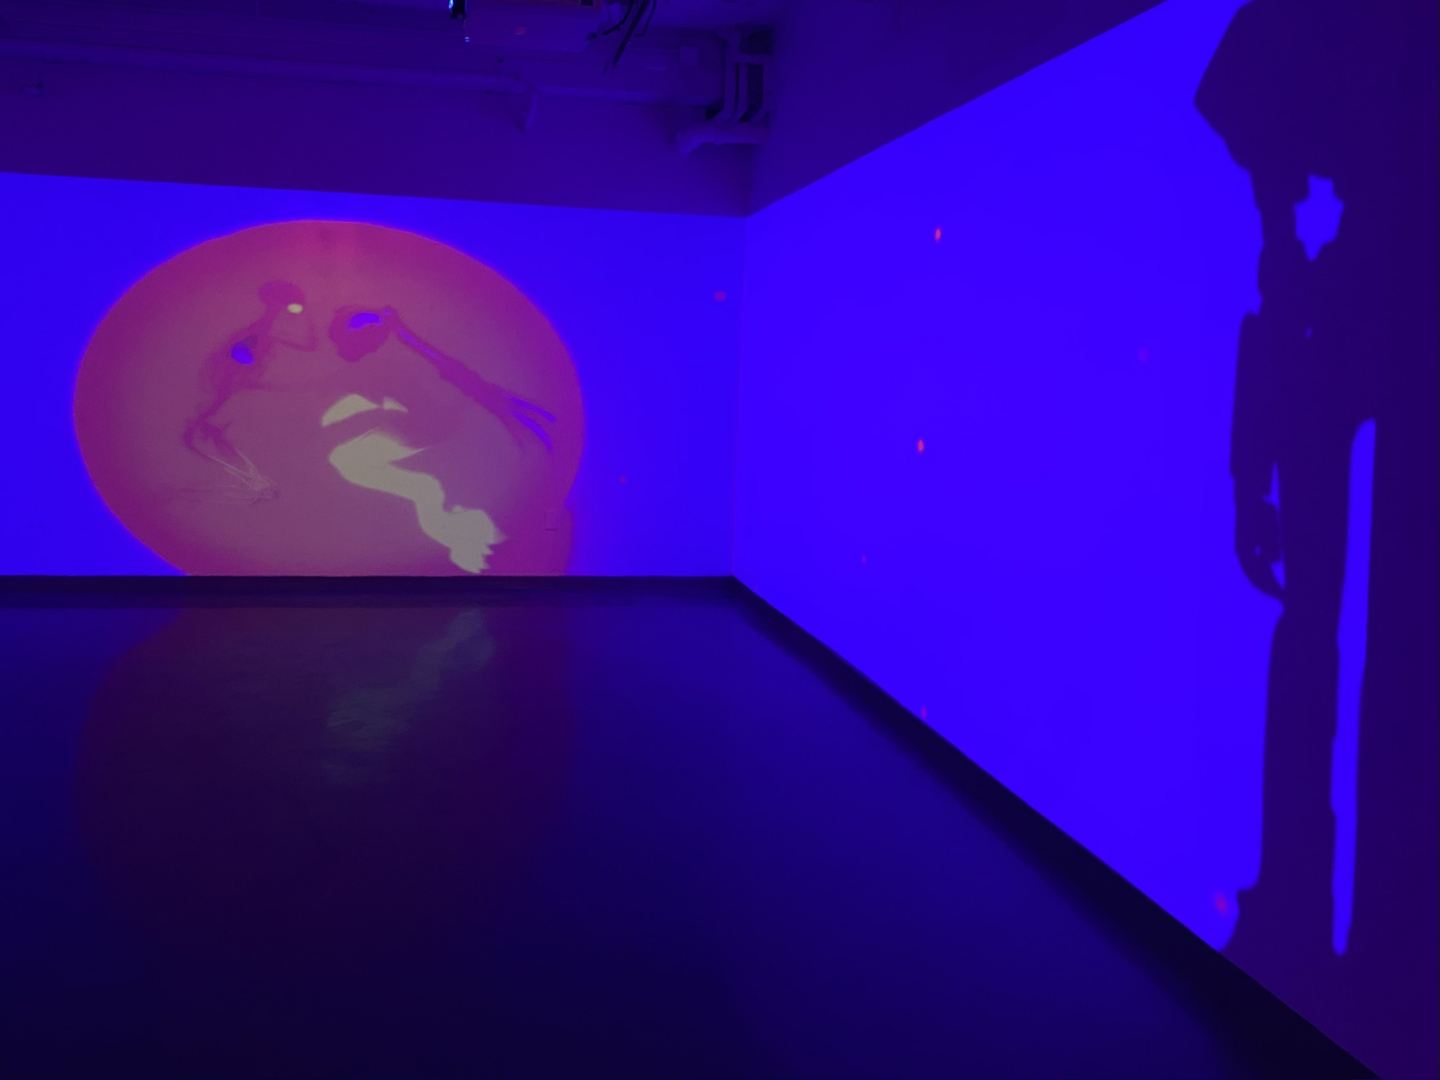 Single channel video projection featuring saturated colors and showing two avatars.